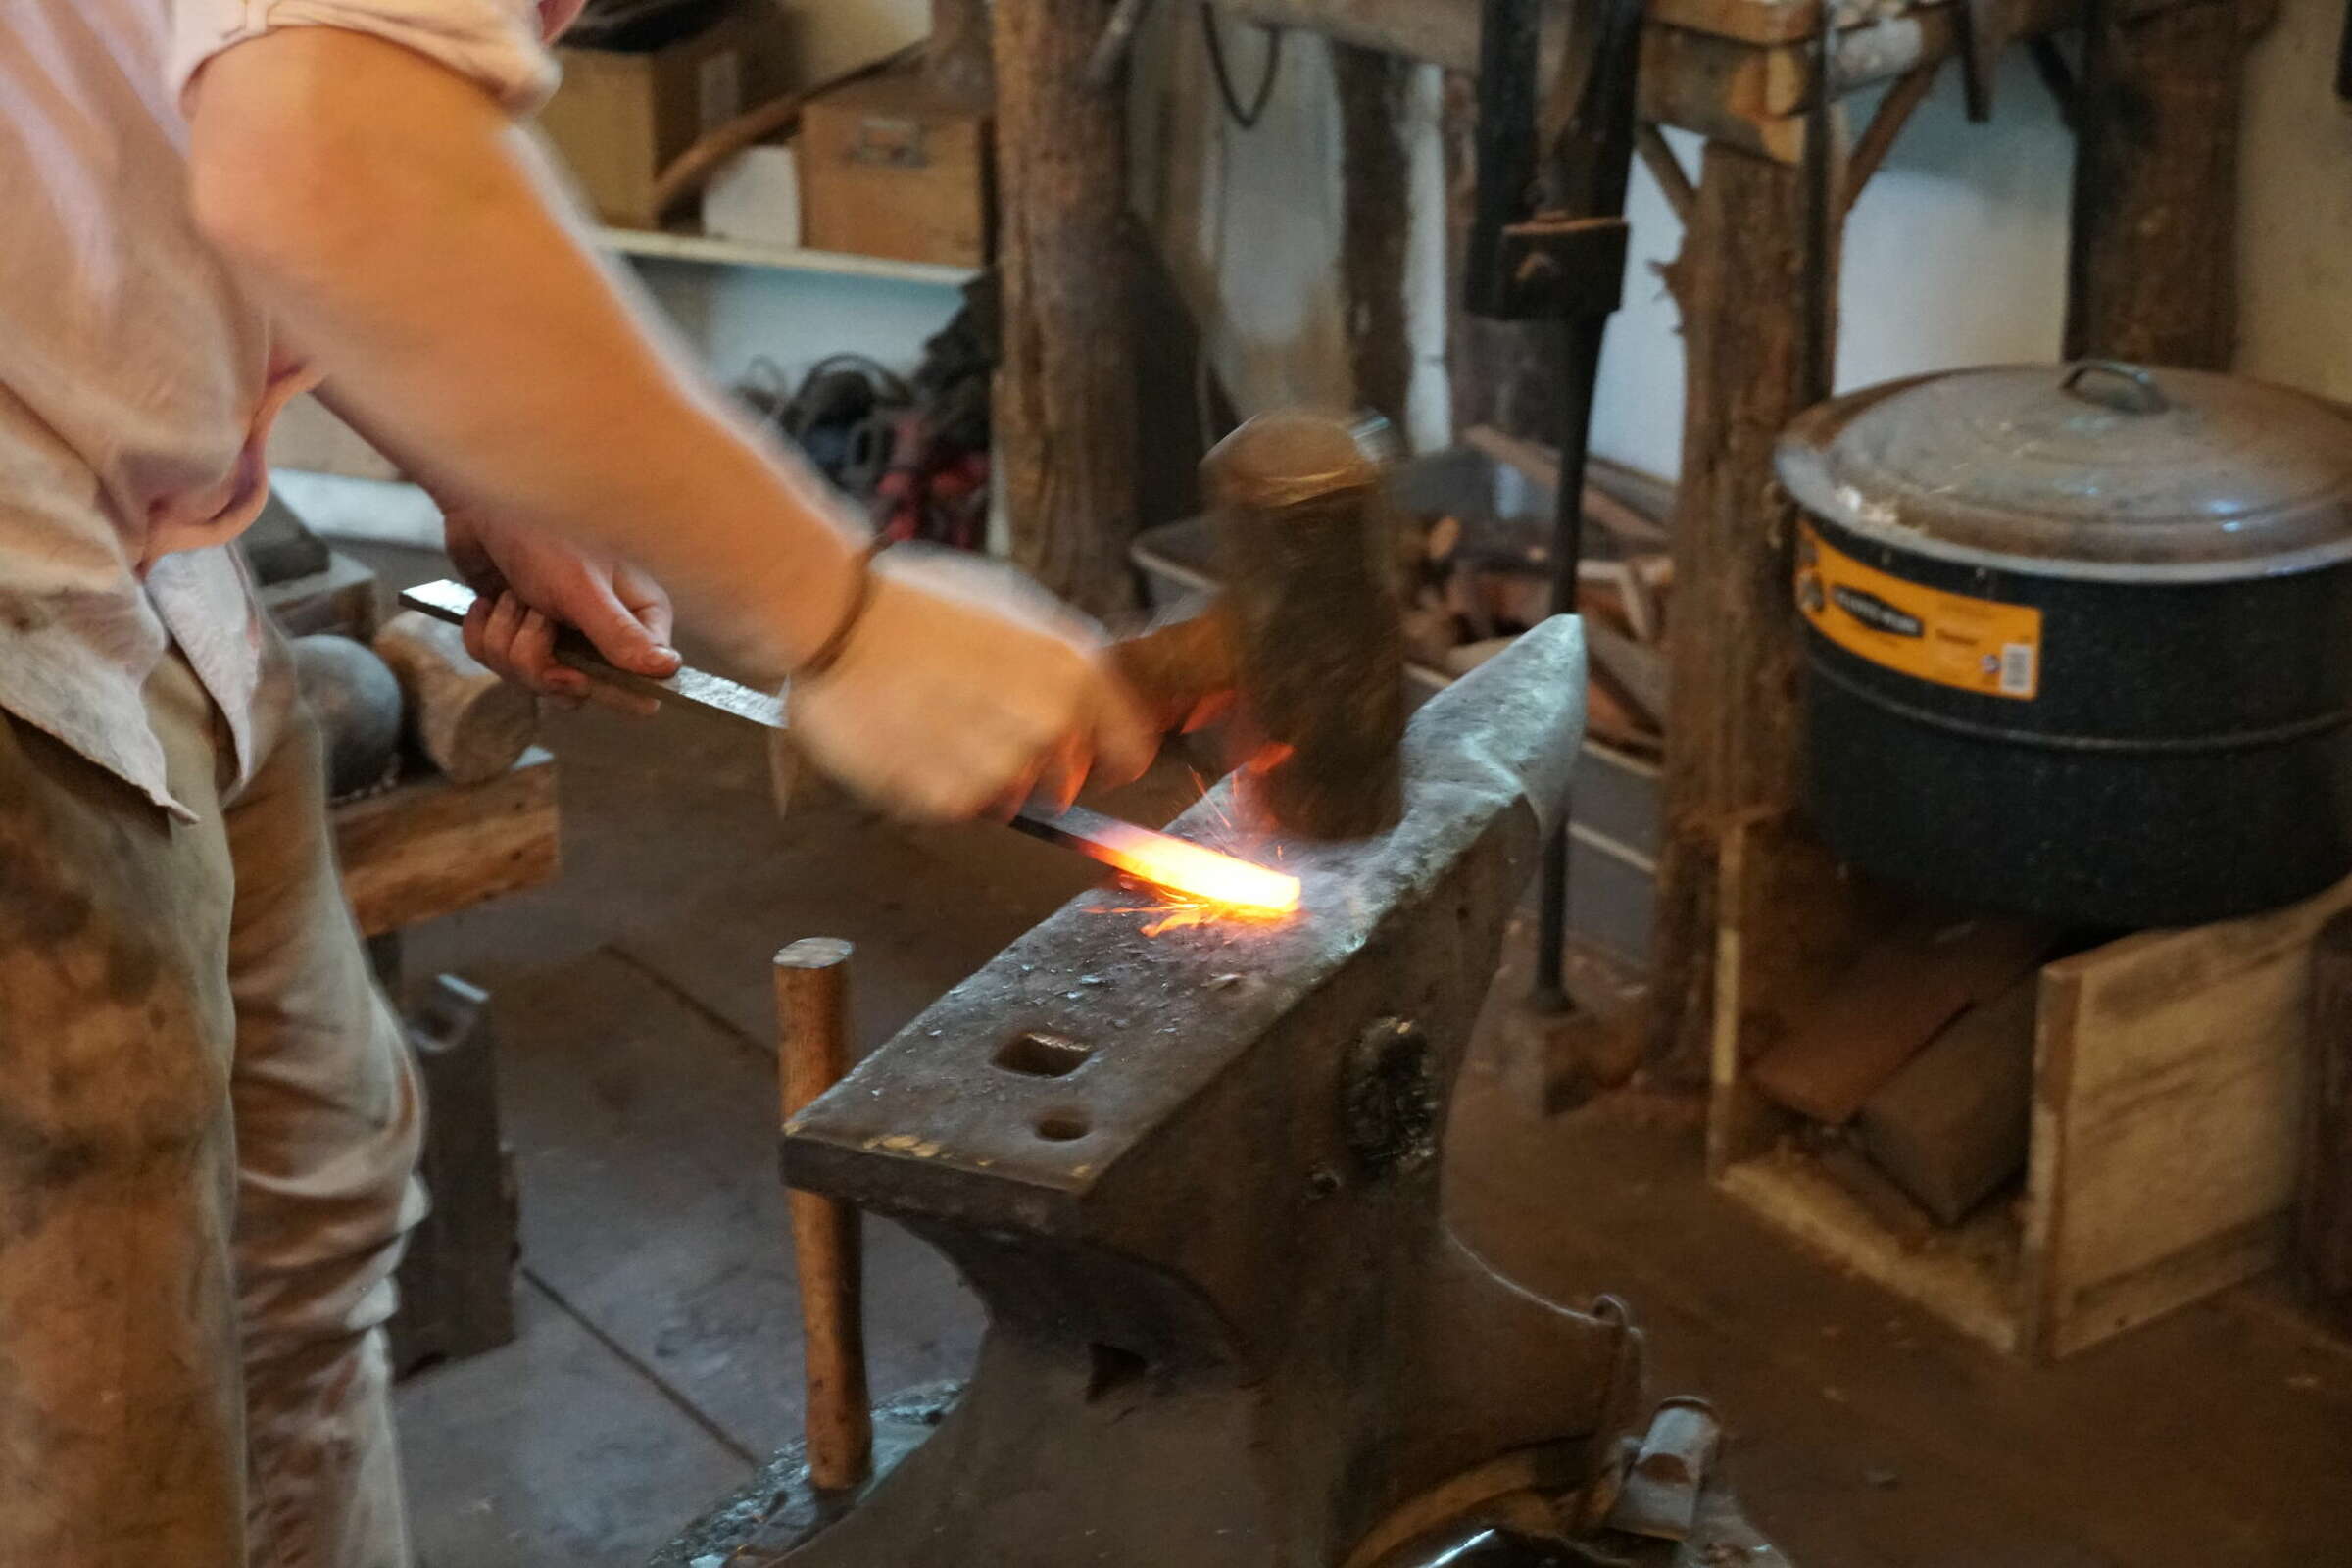 Spijk Selby hammering out a knife blank at his Ghent, NY forge - Patrick Greco, Albany Times Union (Click image to enbiggen)